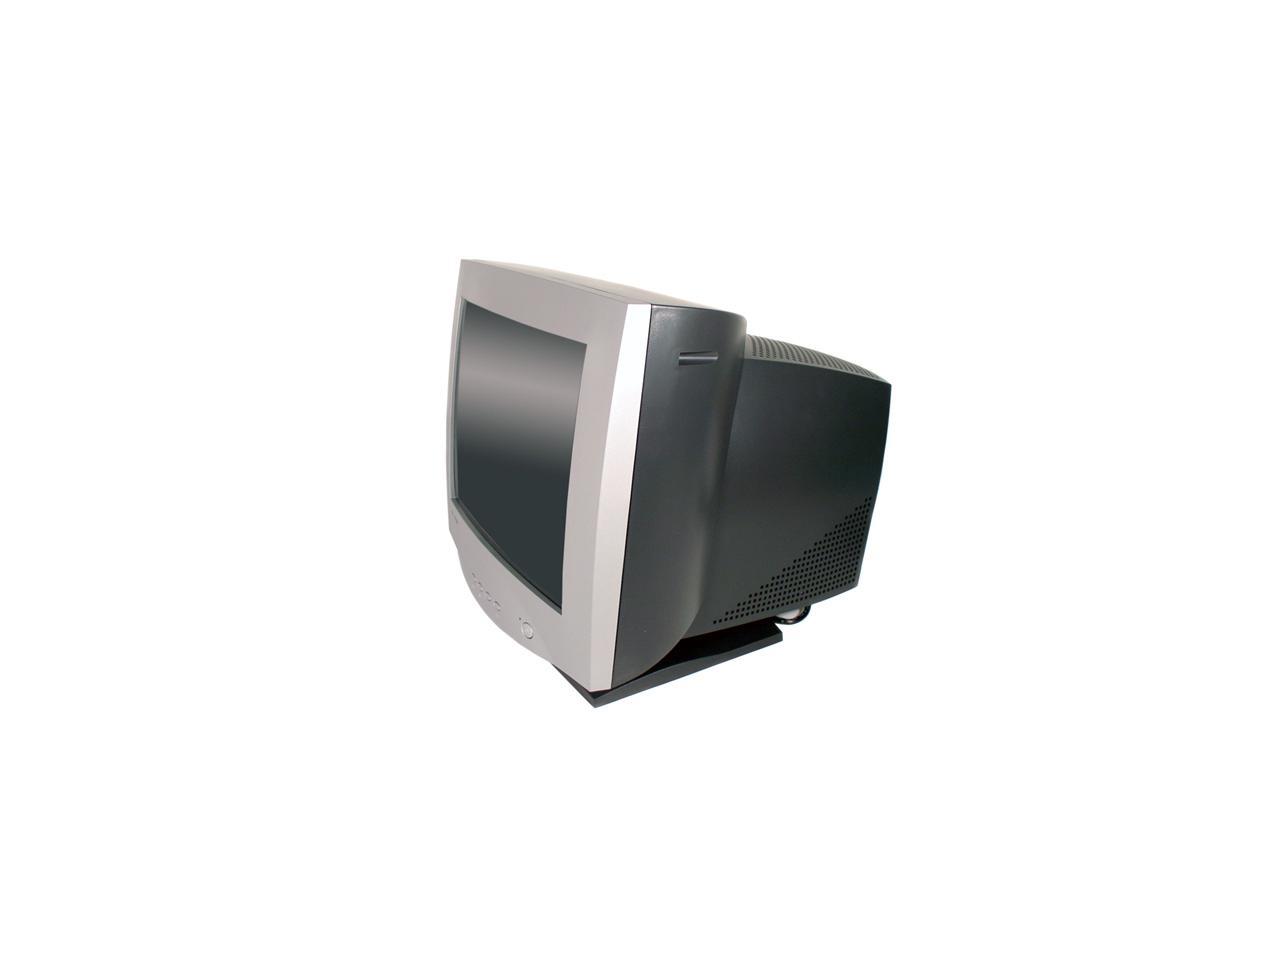 Proview Ps909s Silver And Black 19 Crt Monitor